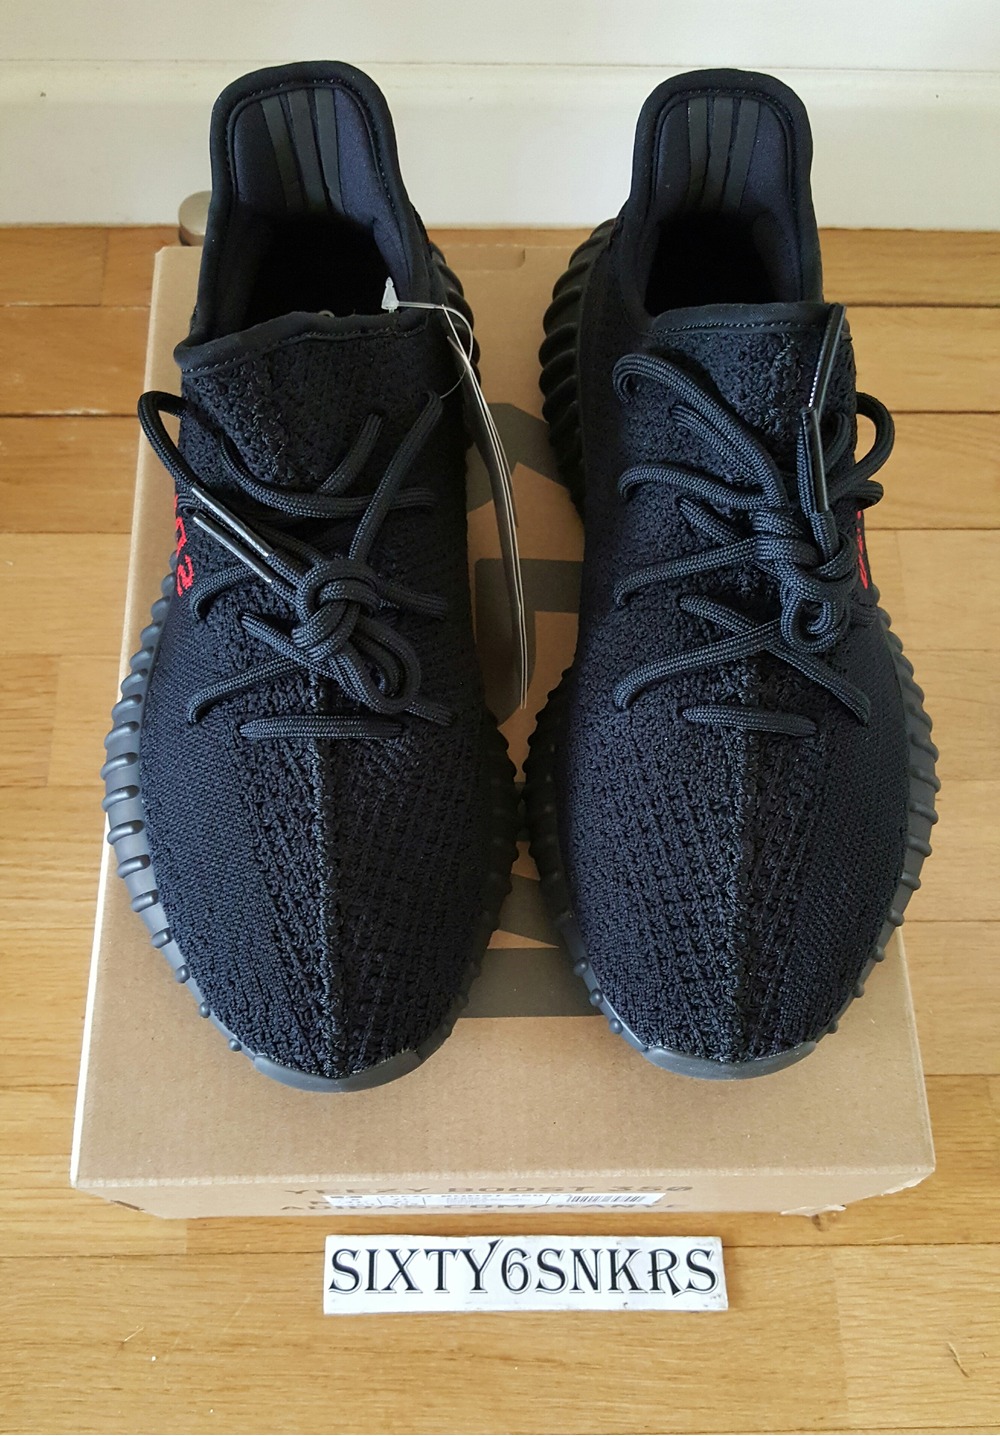 Free Shipping! Yeezy boost 350 v2 